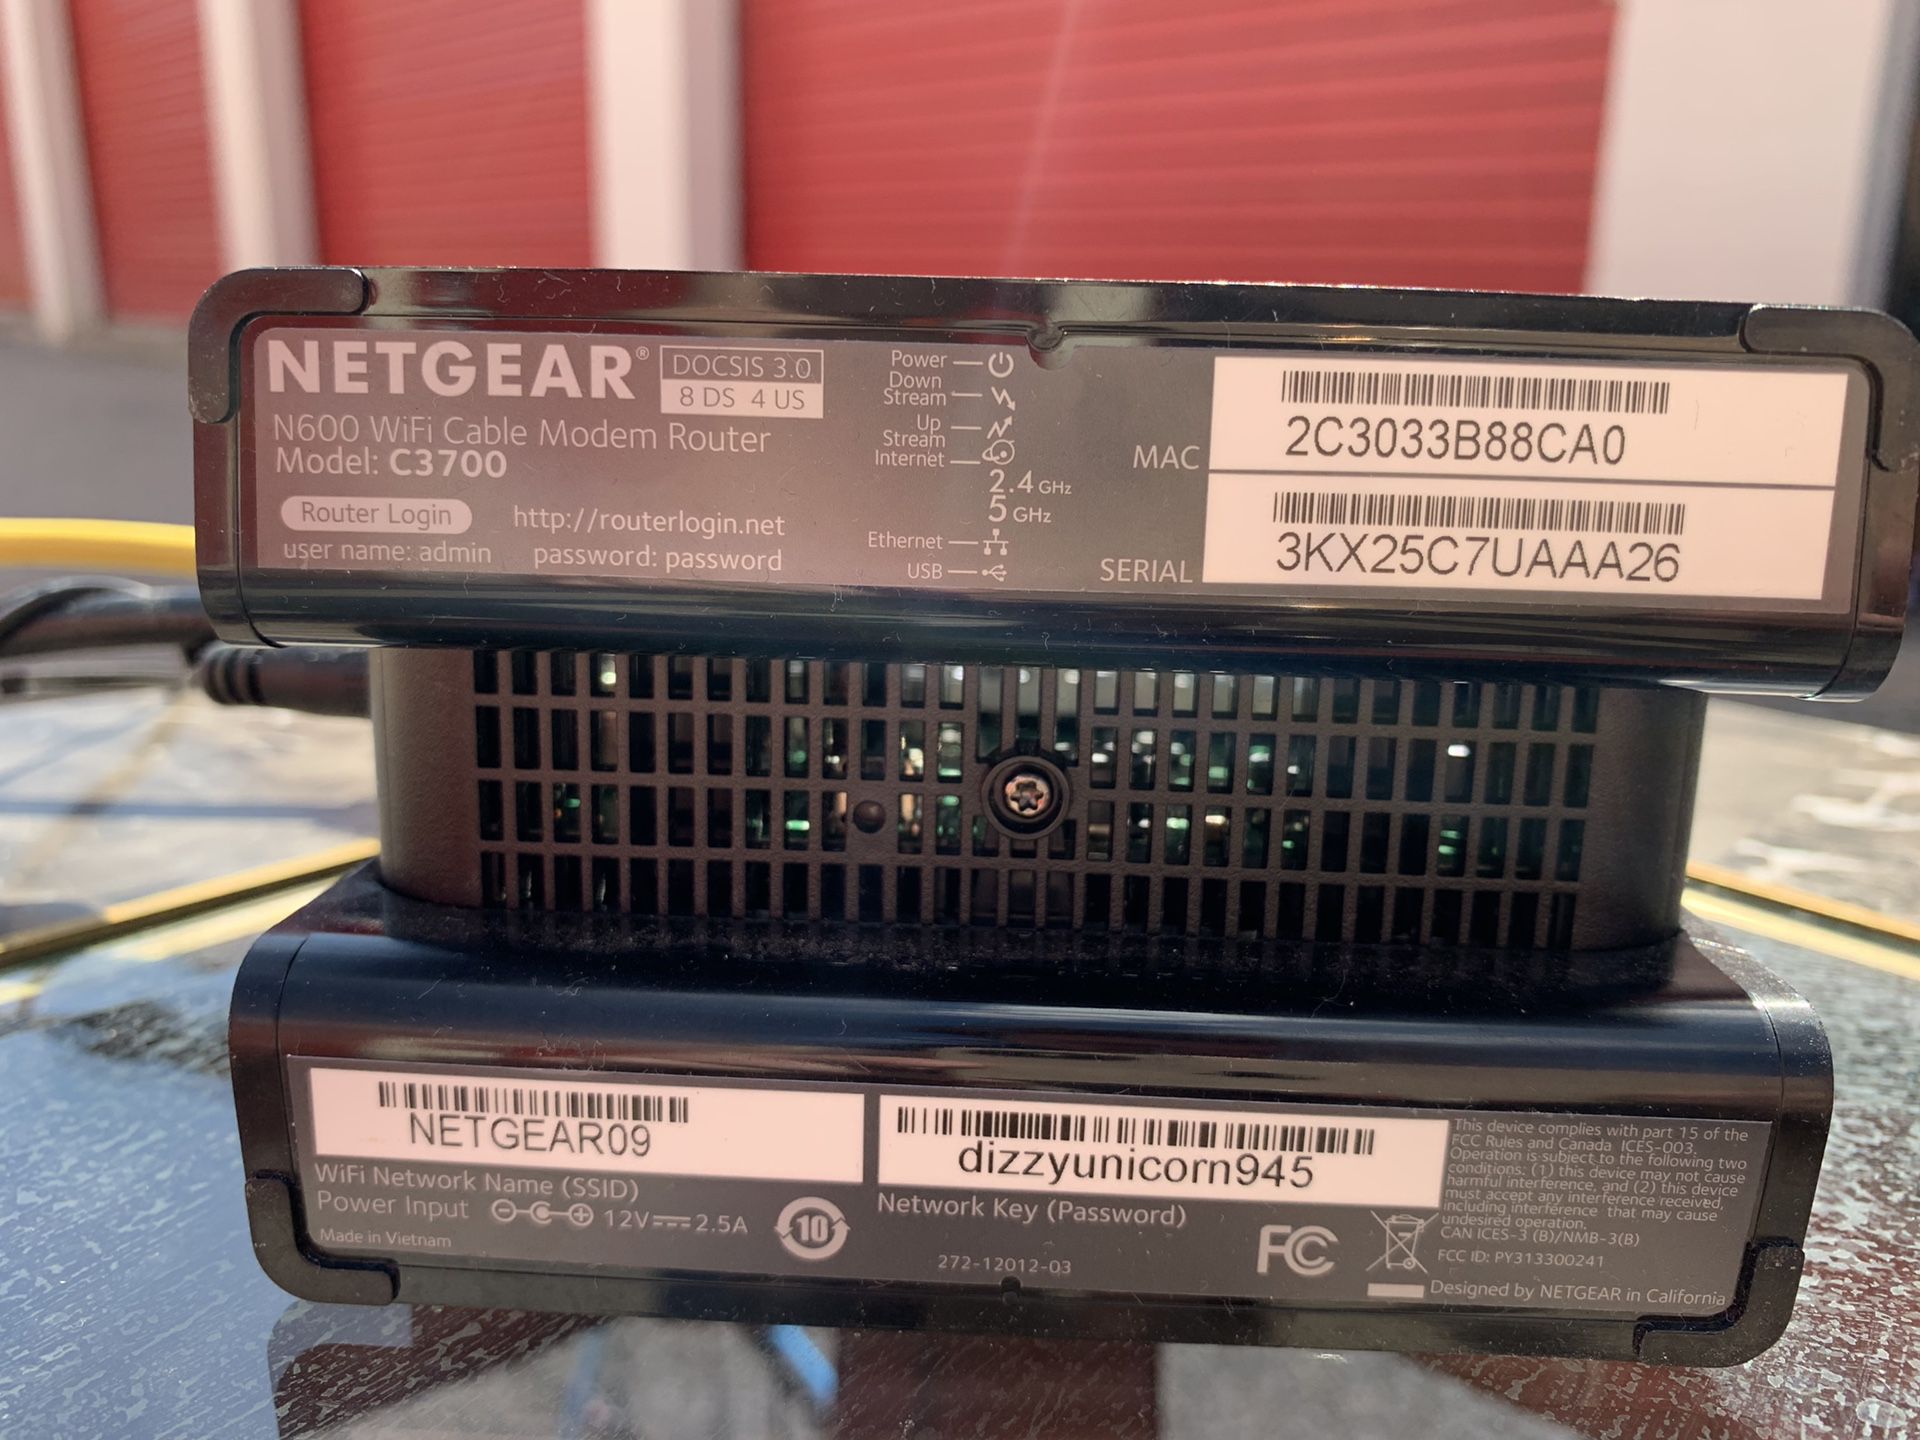 Negear modem and router in one